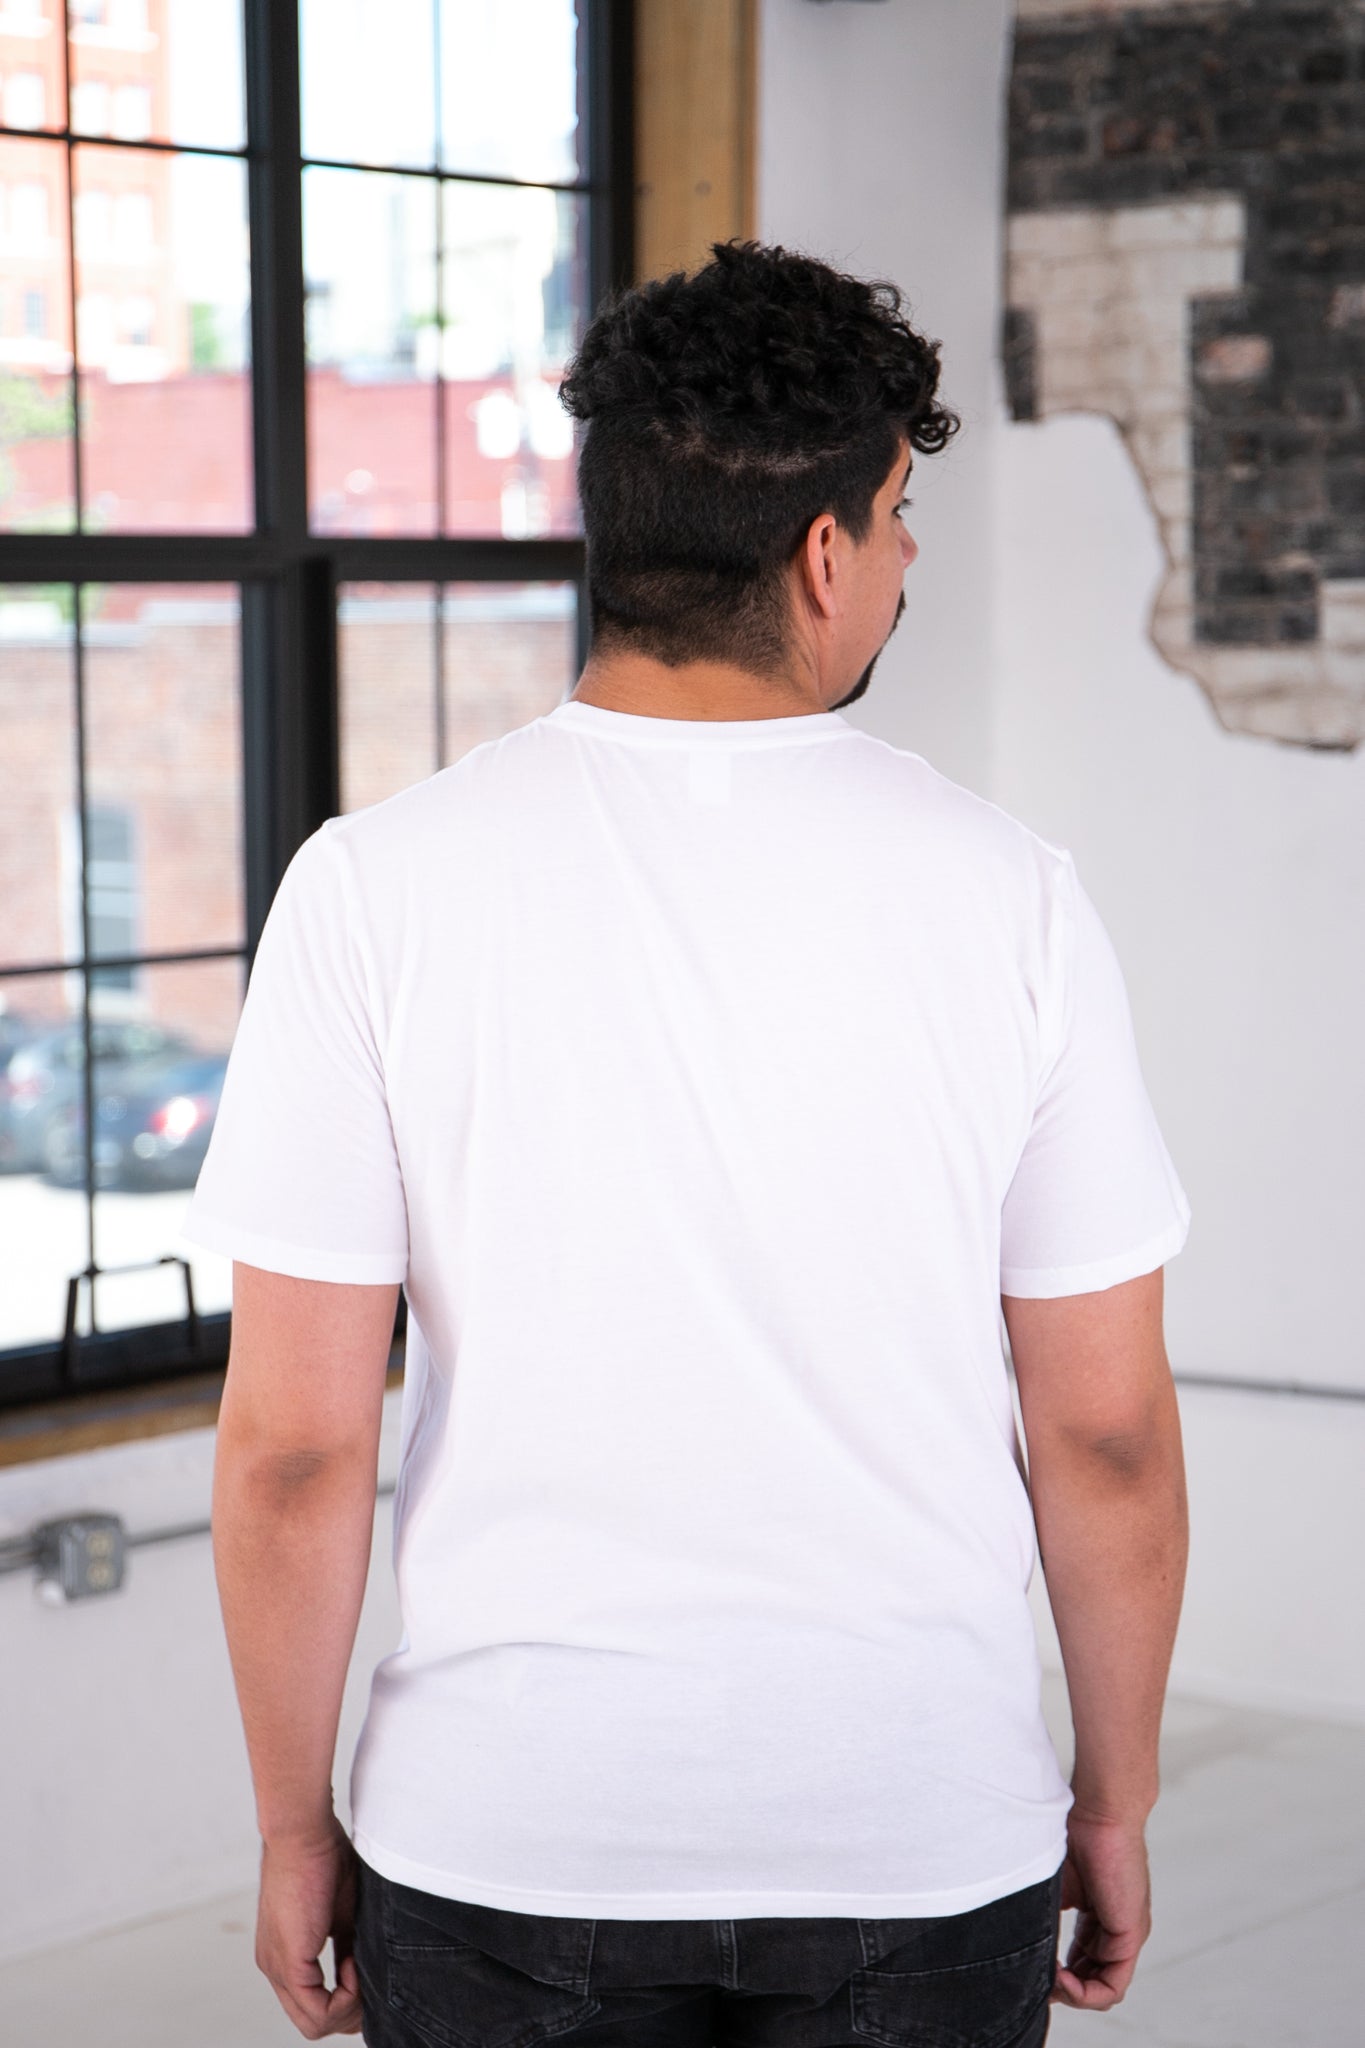 Back View of Male Model wearing GOEX Unisex and Men's Cotton Tee in White